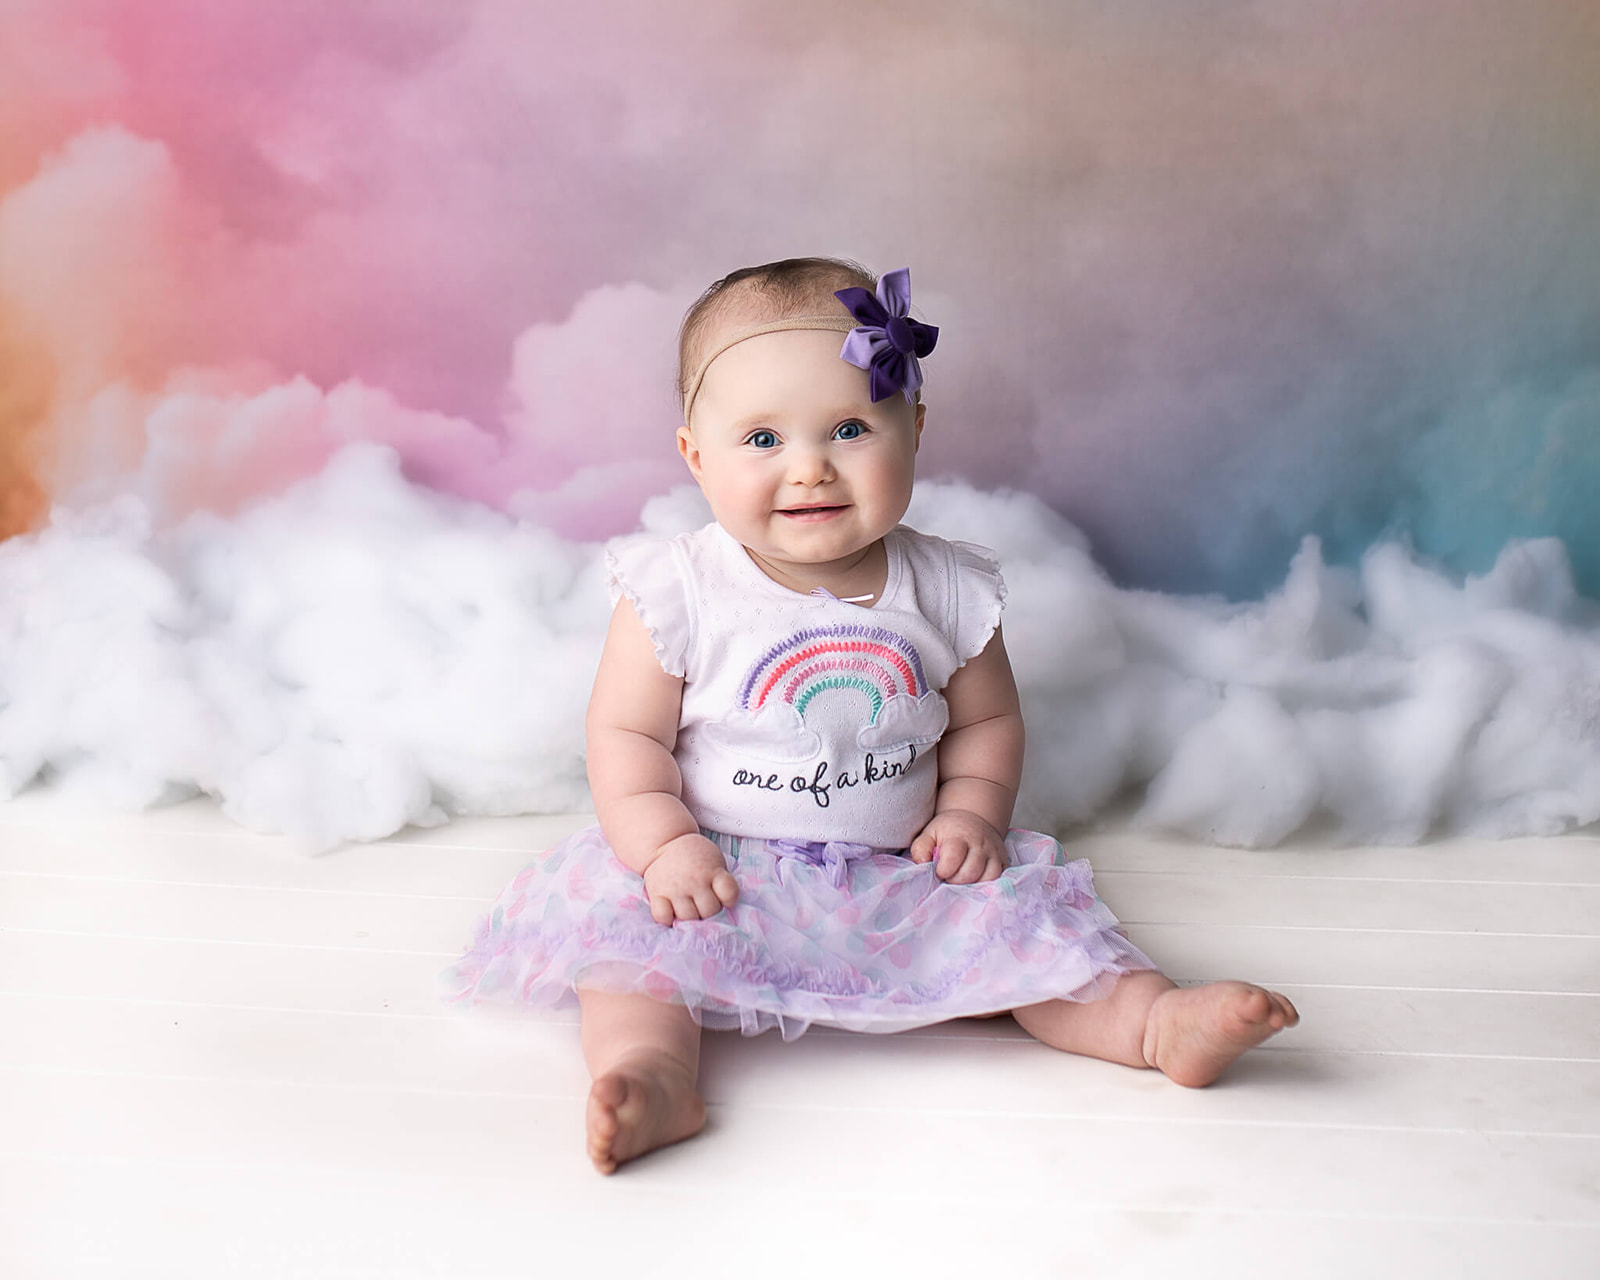 Canton OH newborn photographer captures happy baby girl during their milestone photo session